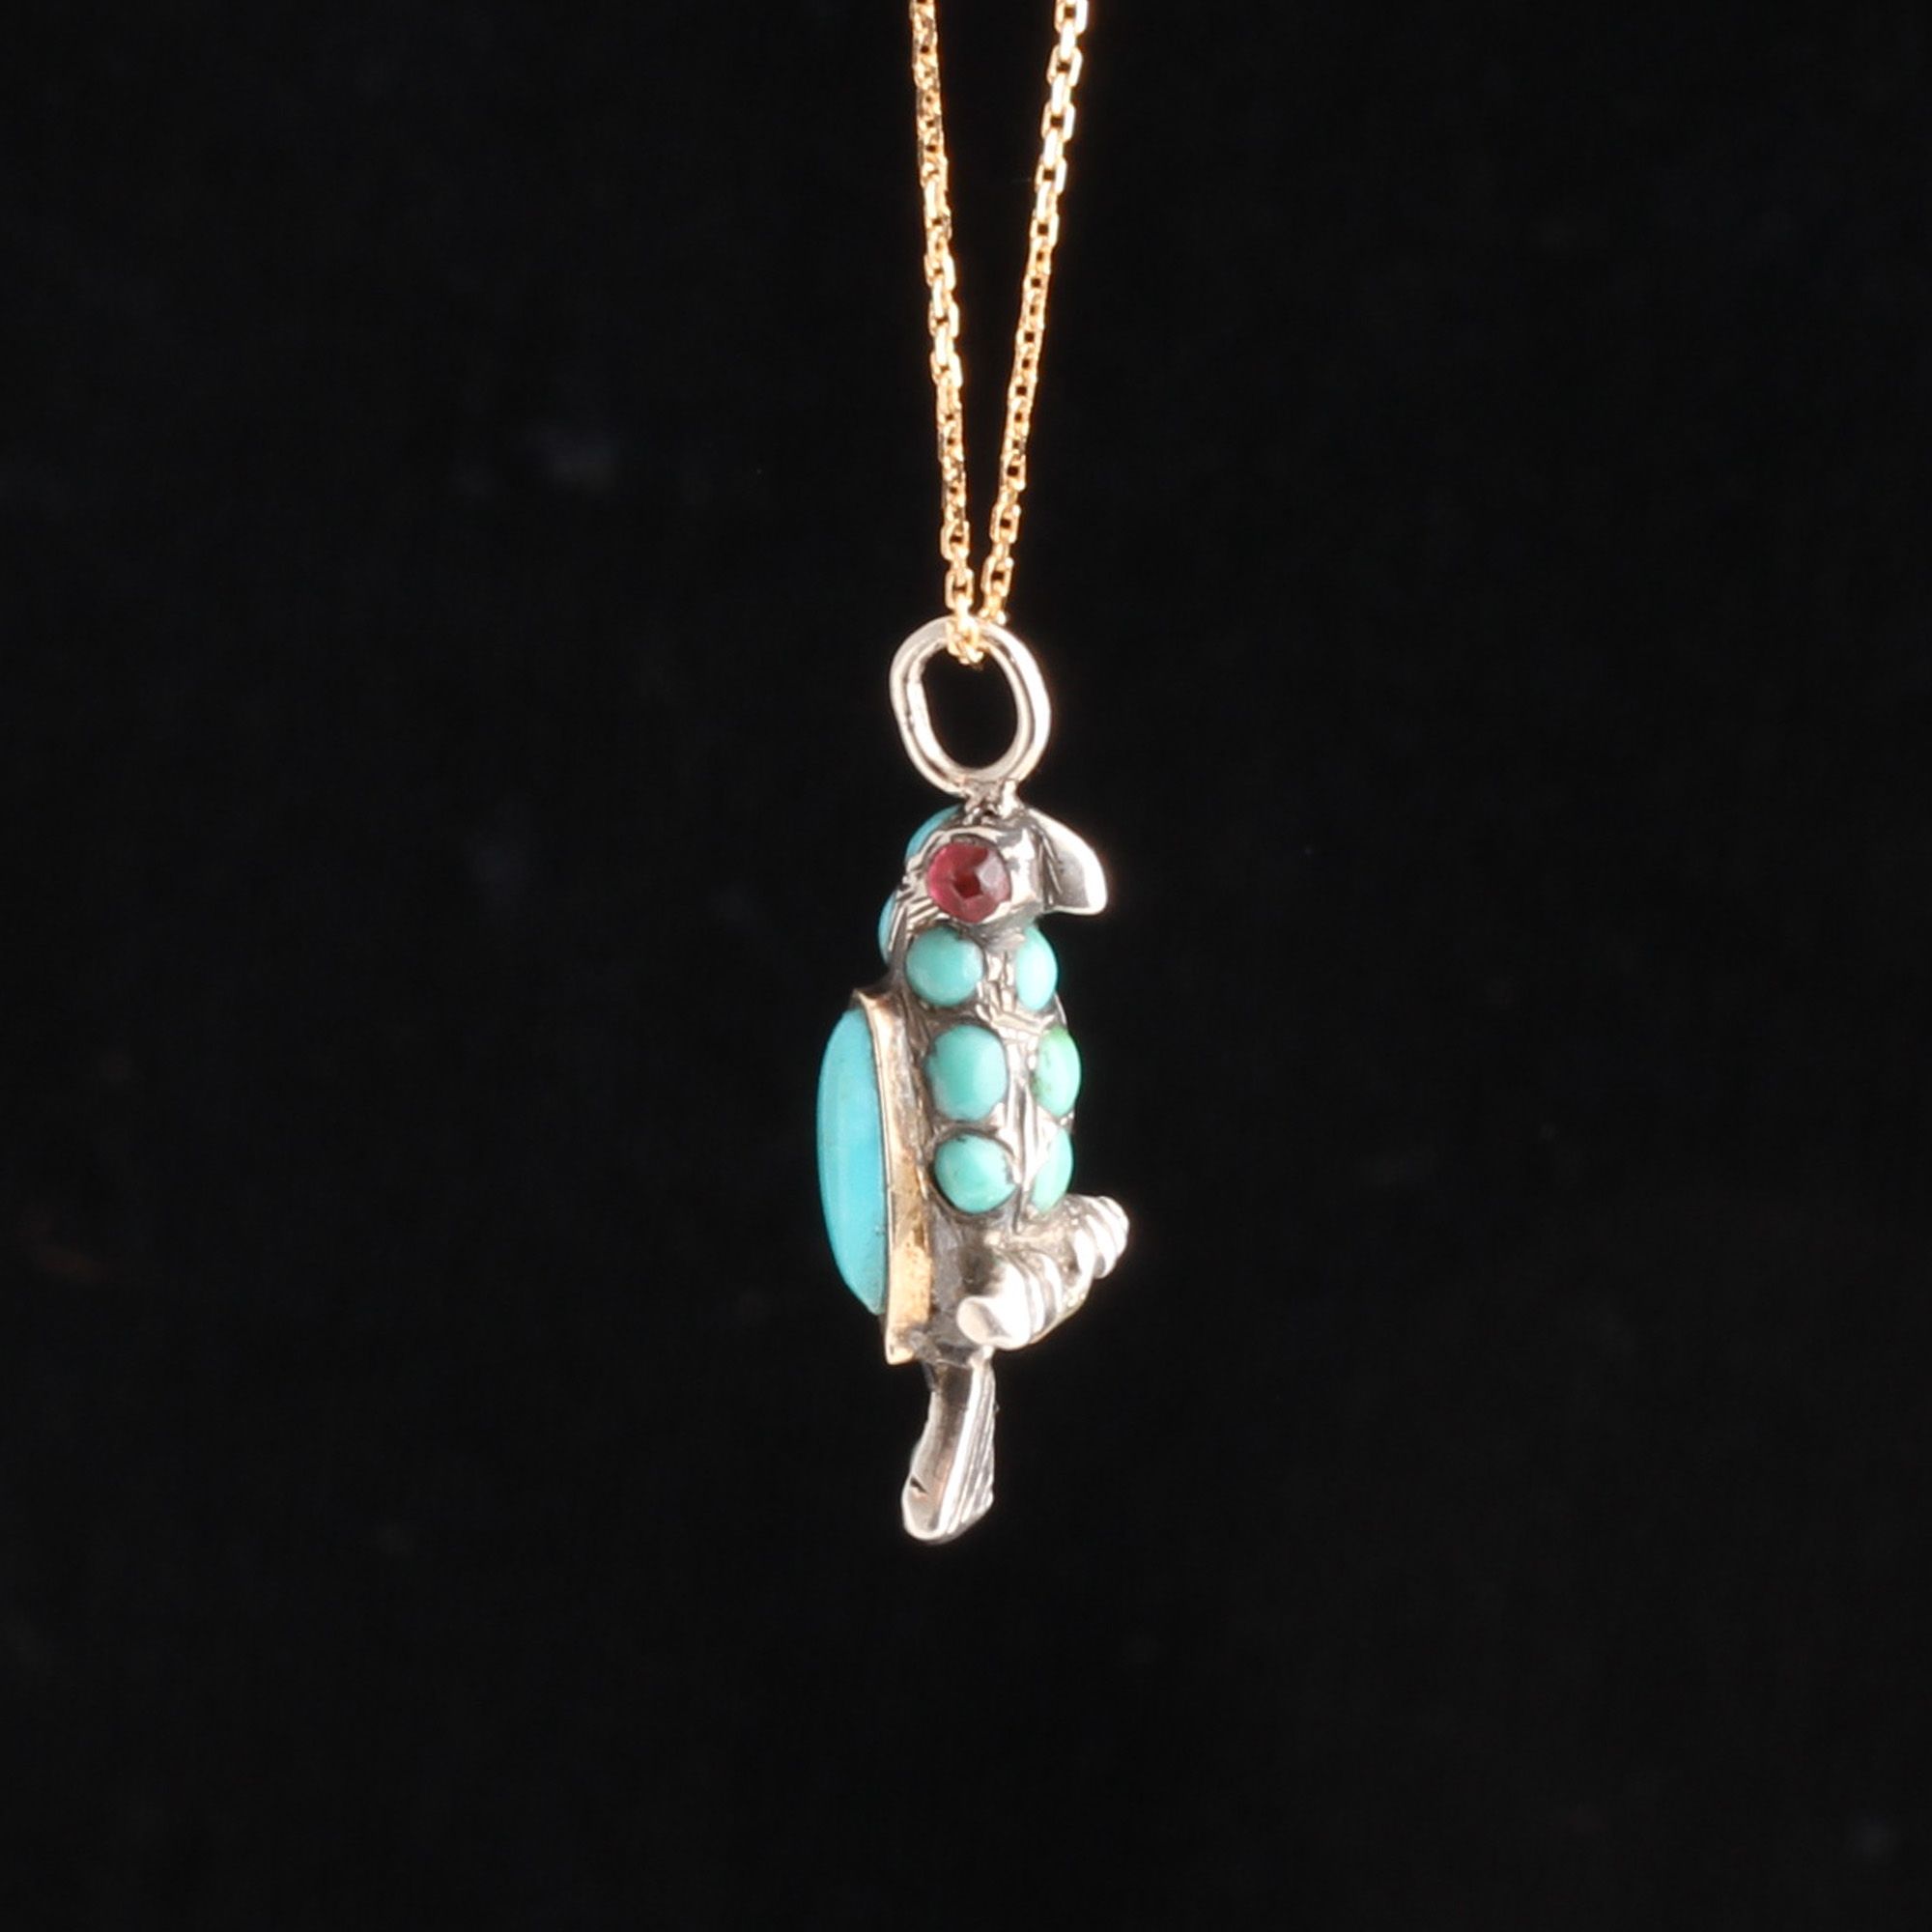 Detail of Victorian Turquoise Parrot Necklace